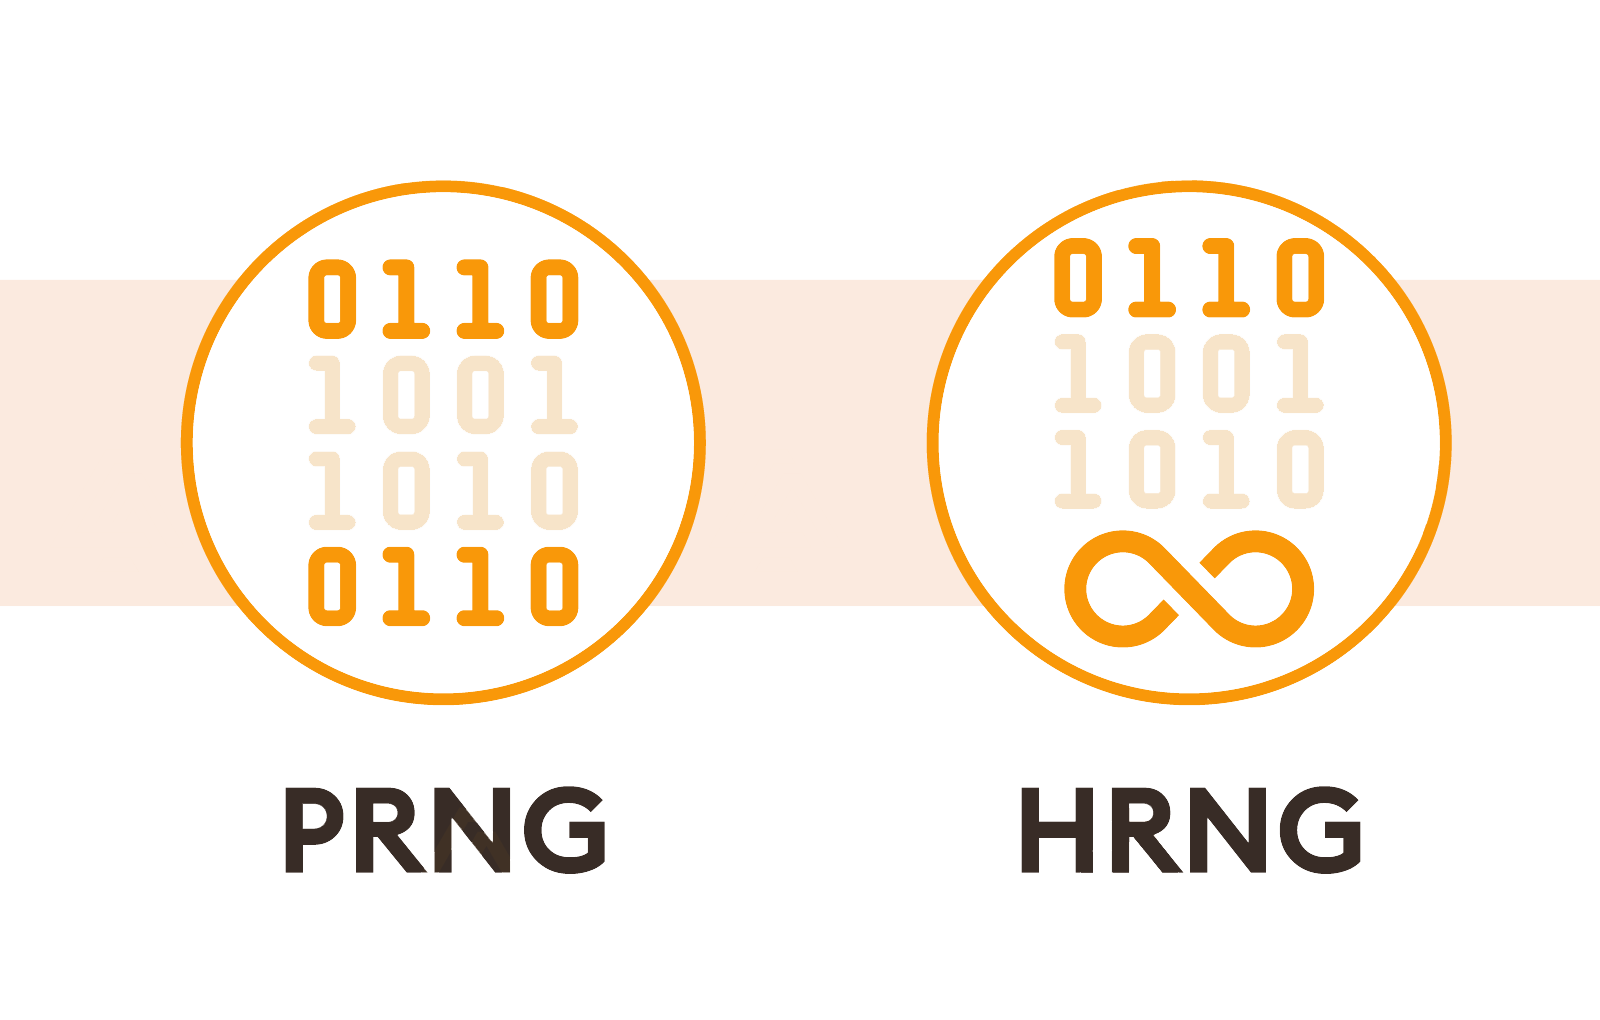 How Does RNG Work: TRNG and PRNG